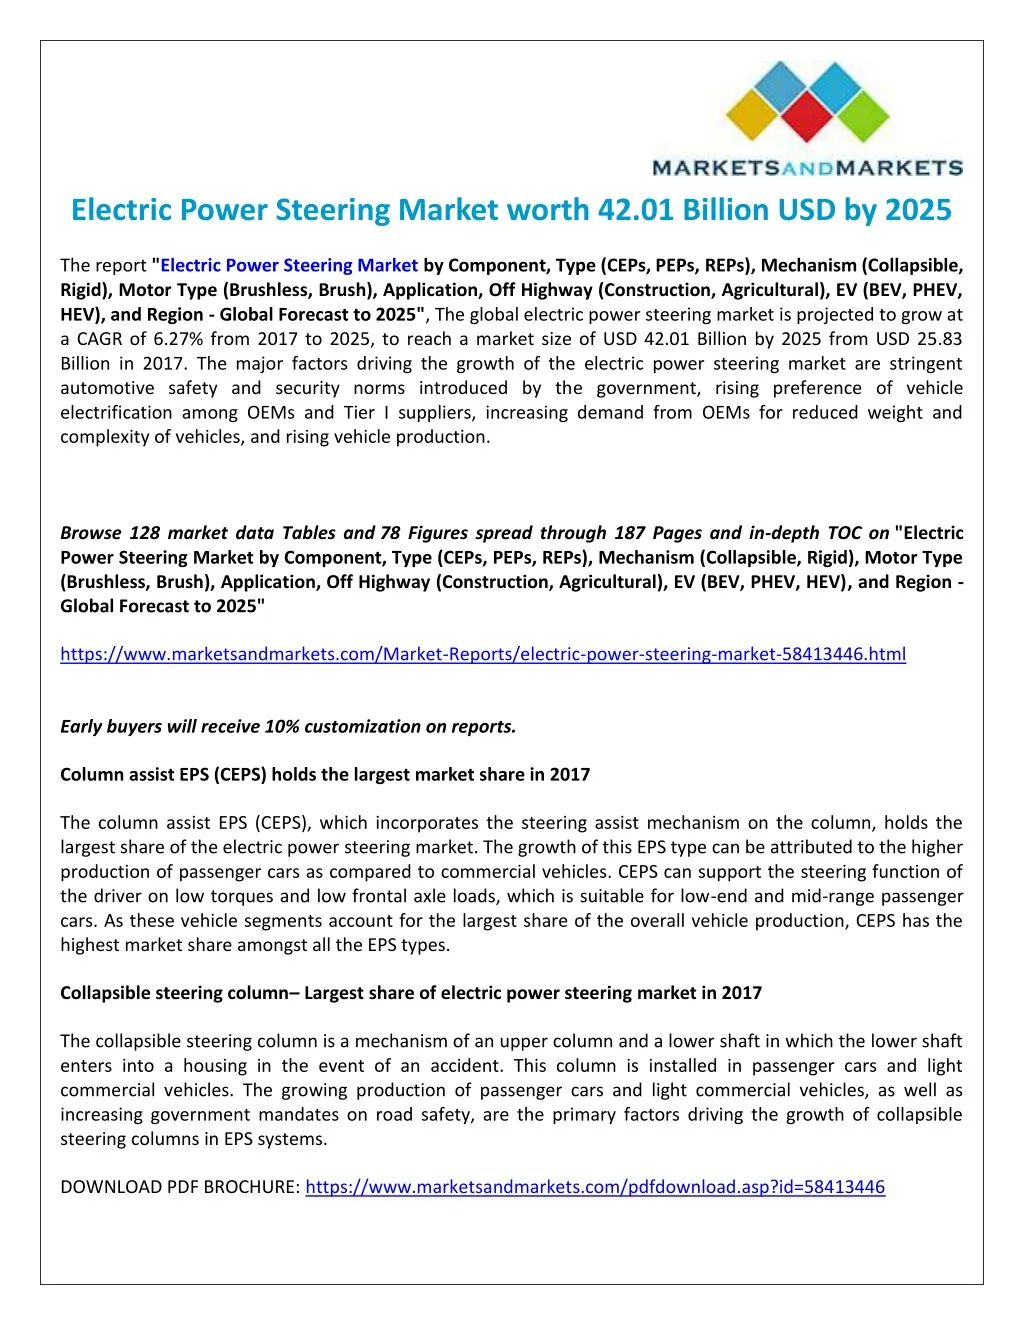 electric power steering market worth